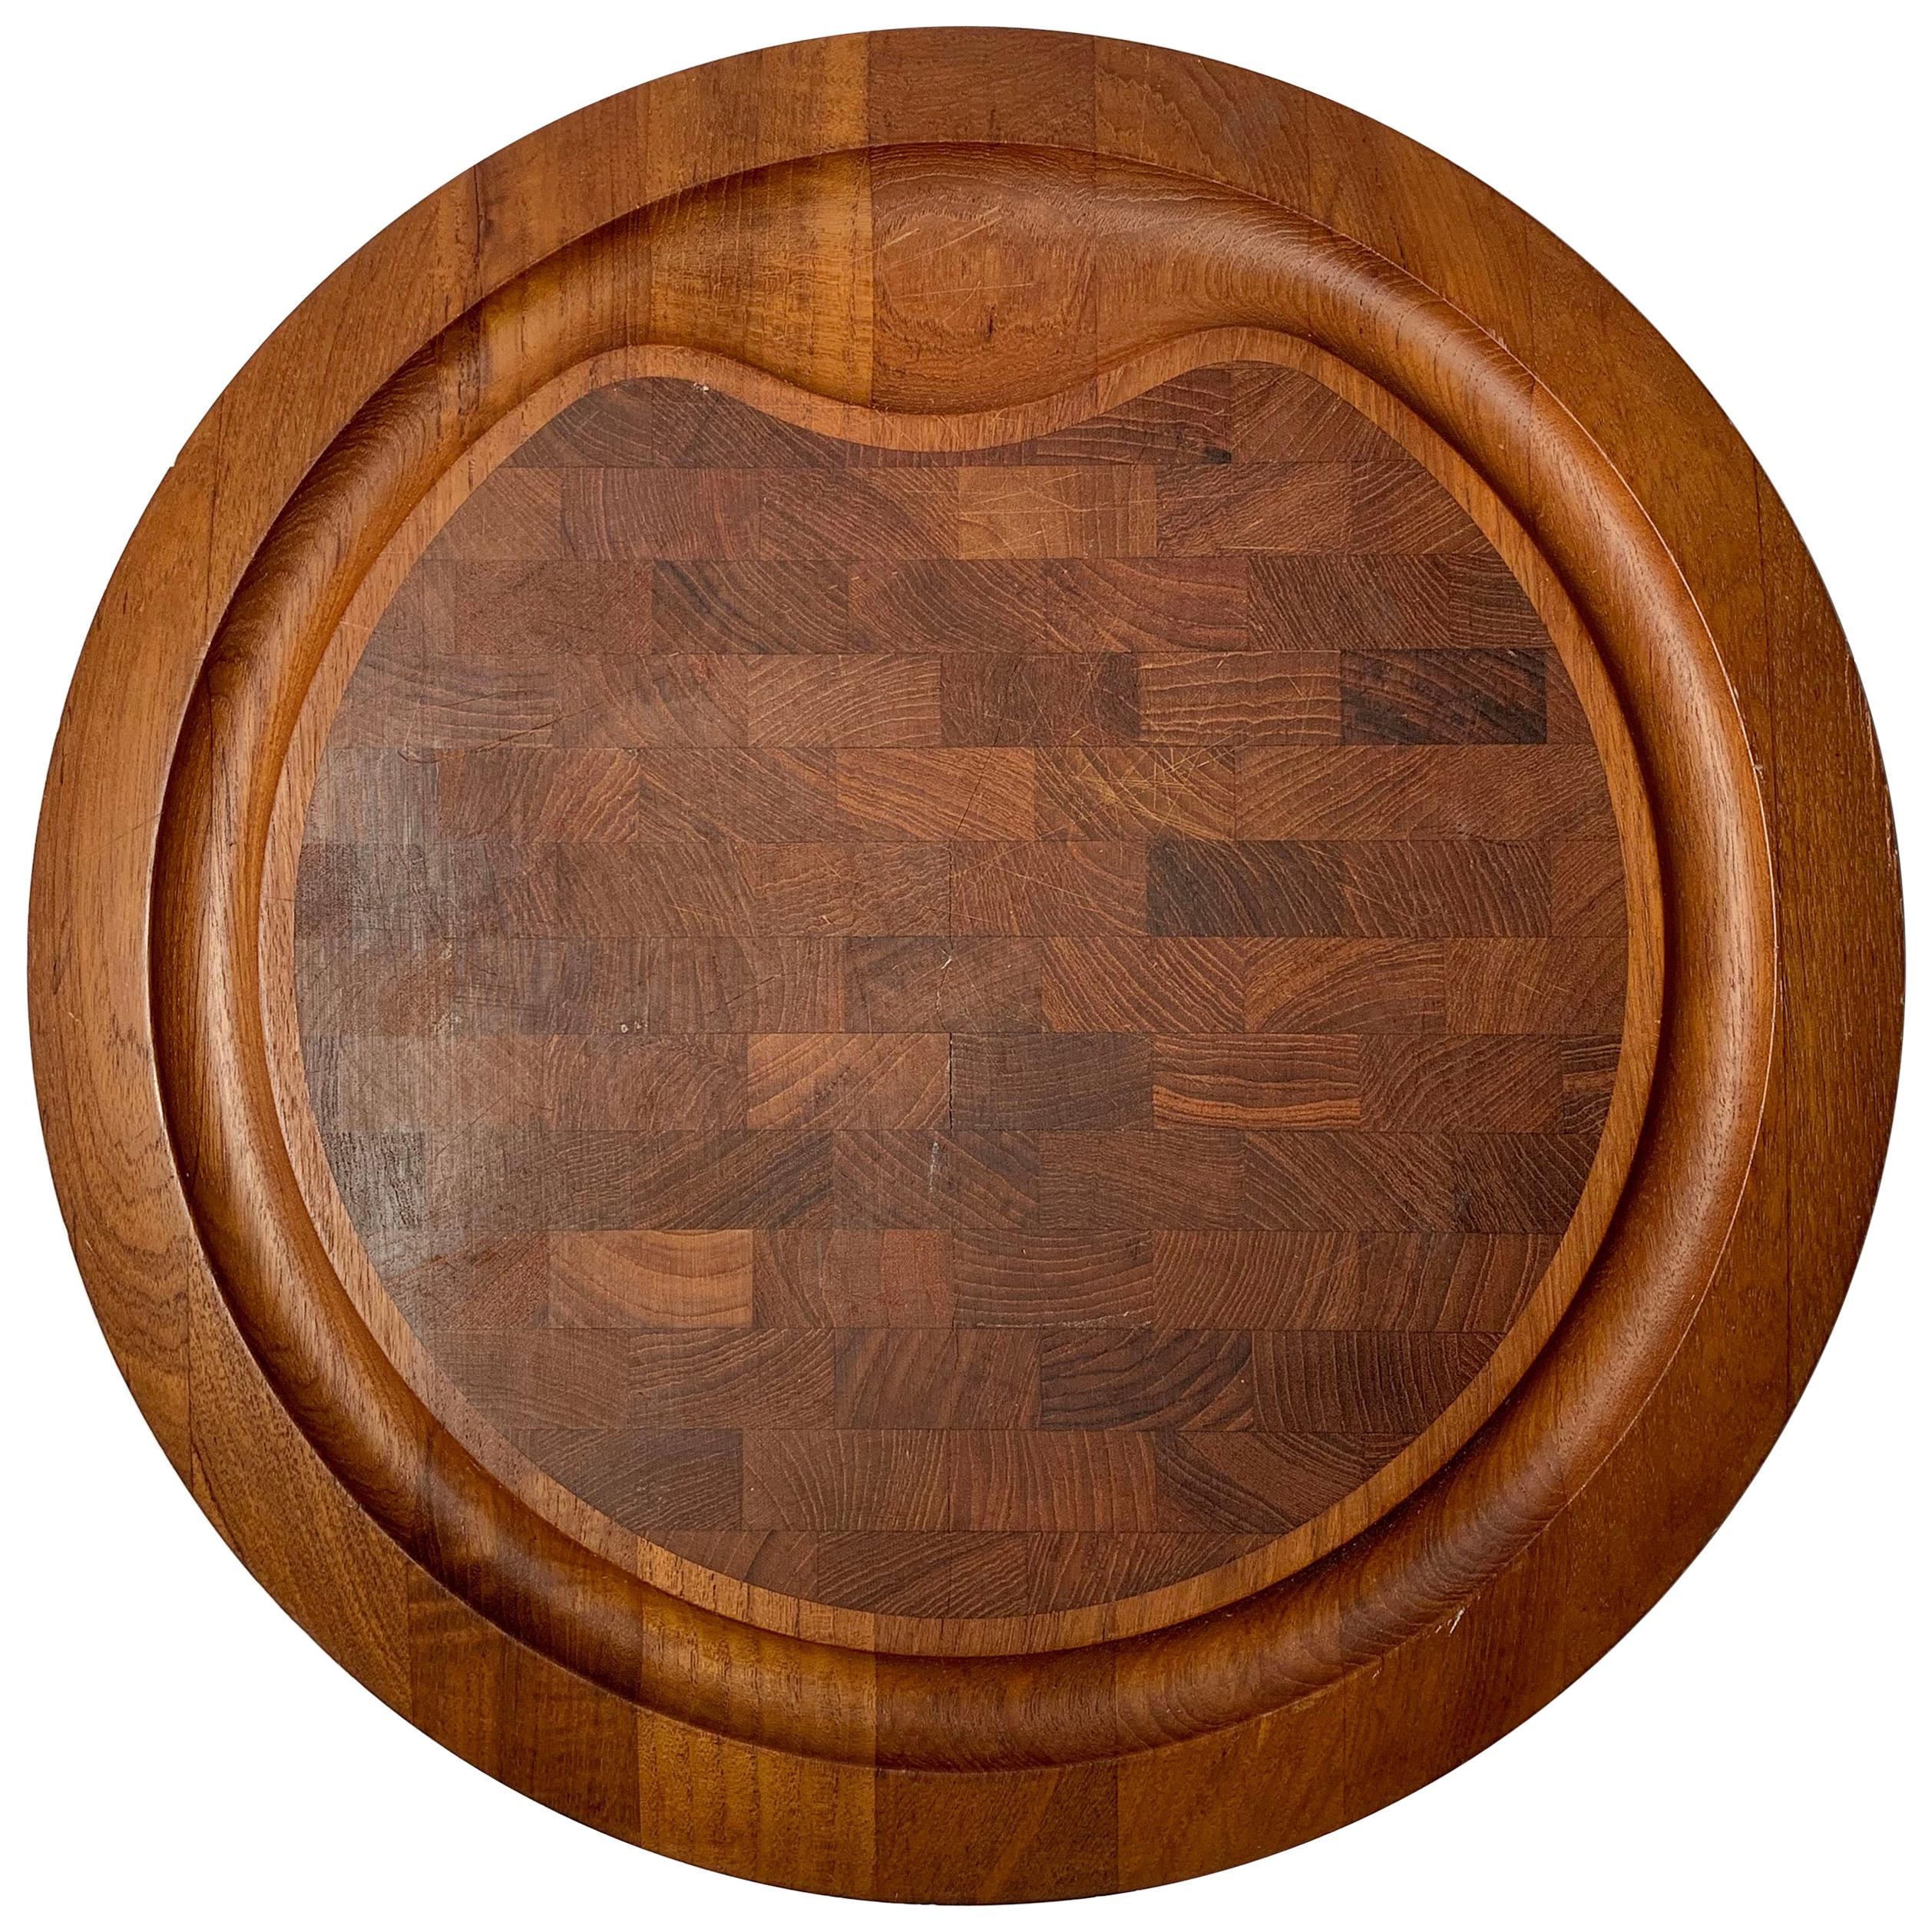 Jens Quistgaard Round Cutting Board or Serving Tray for Dansk